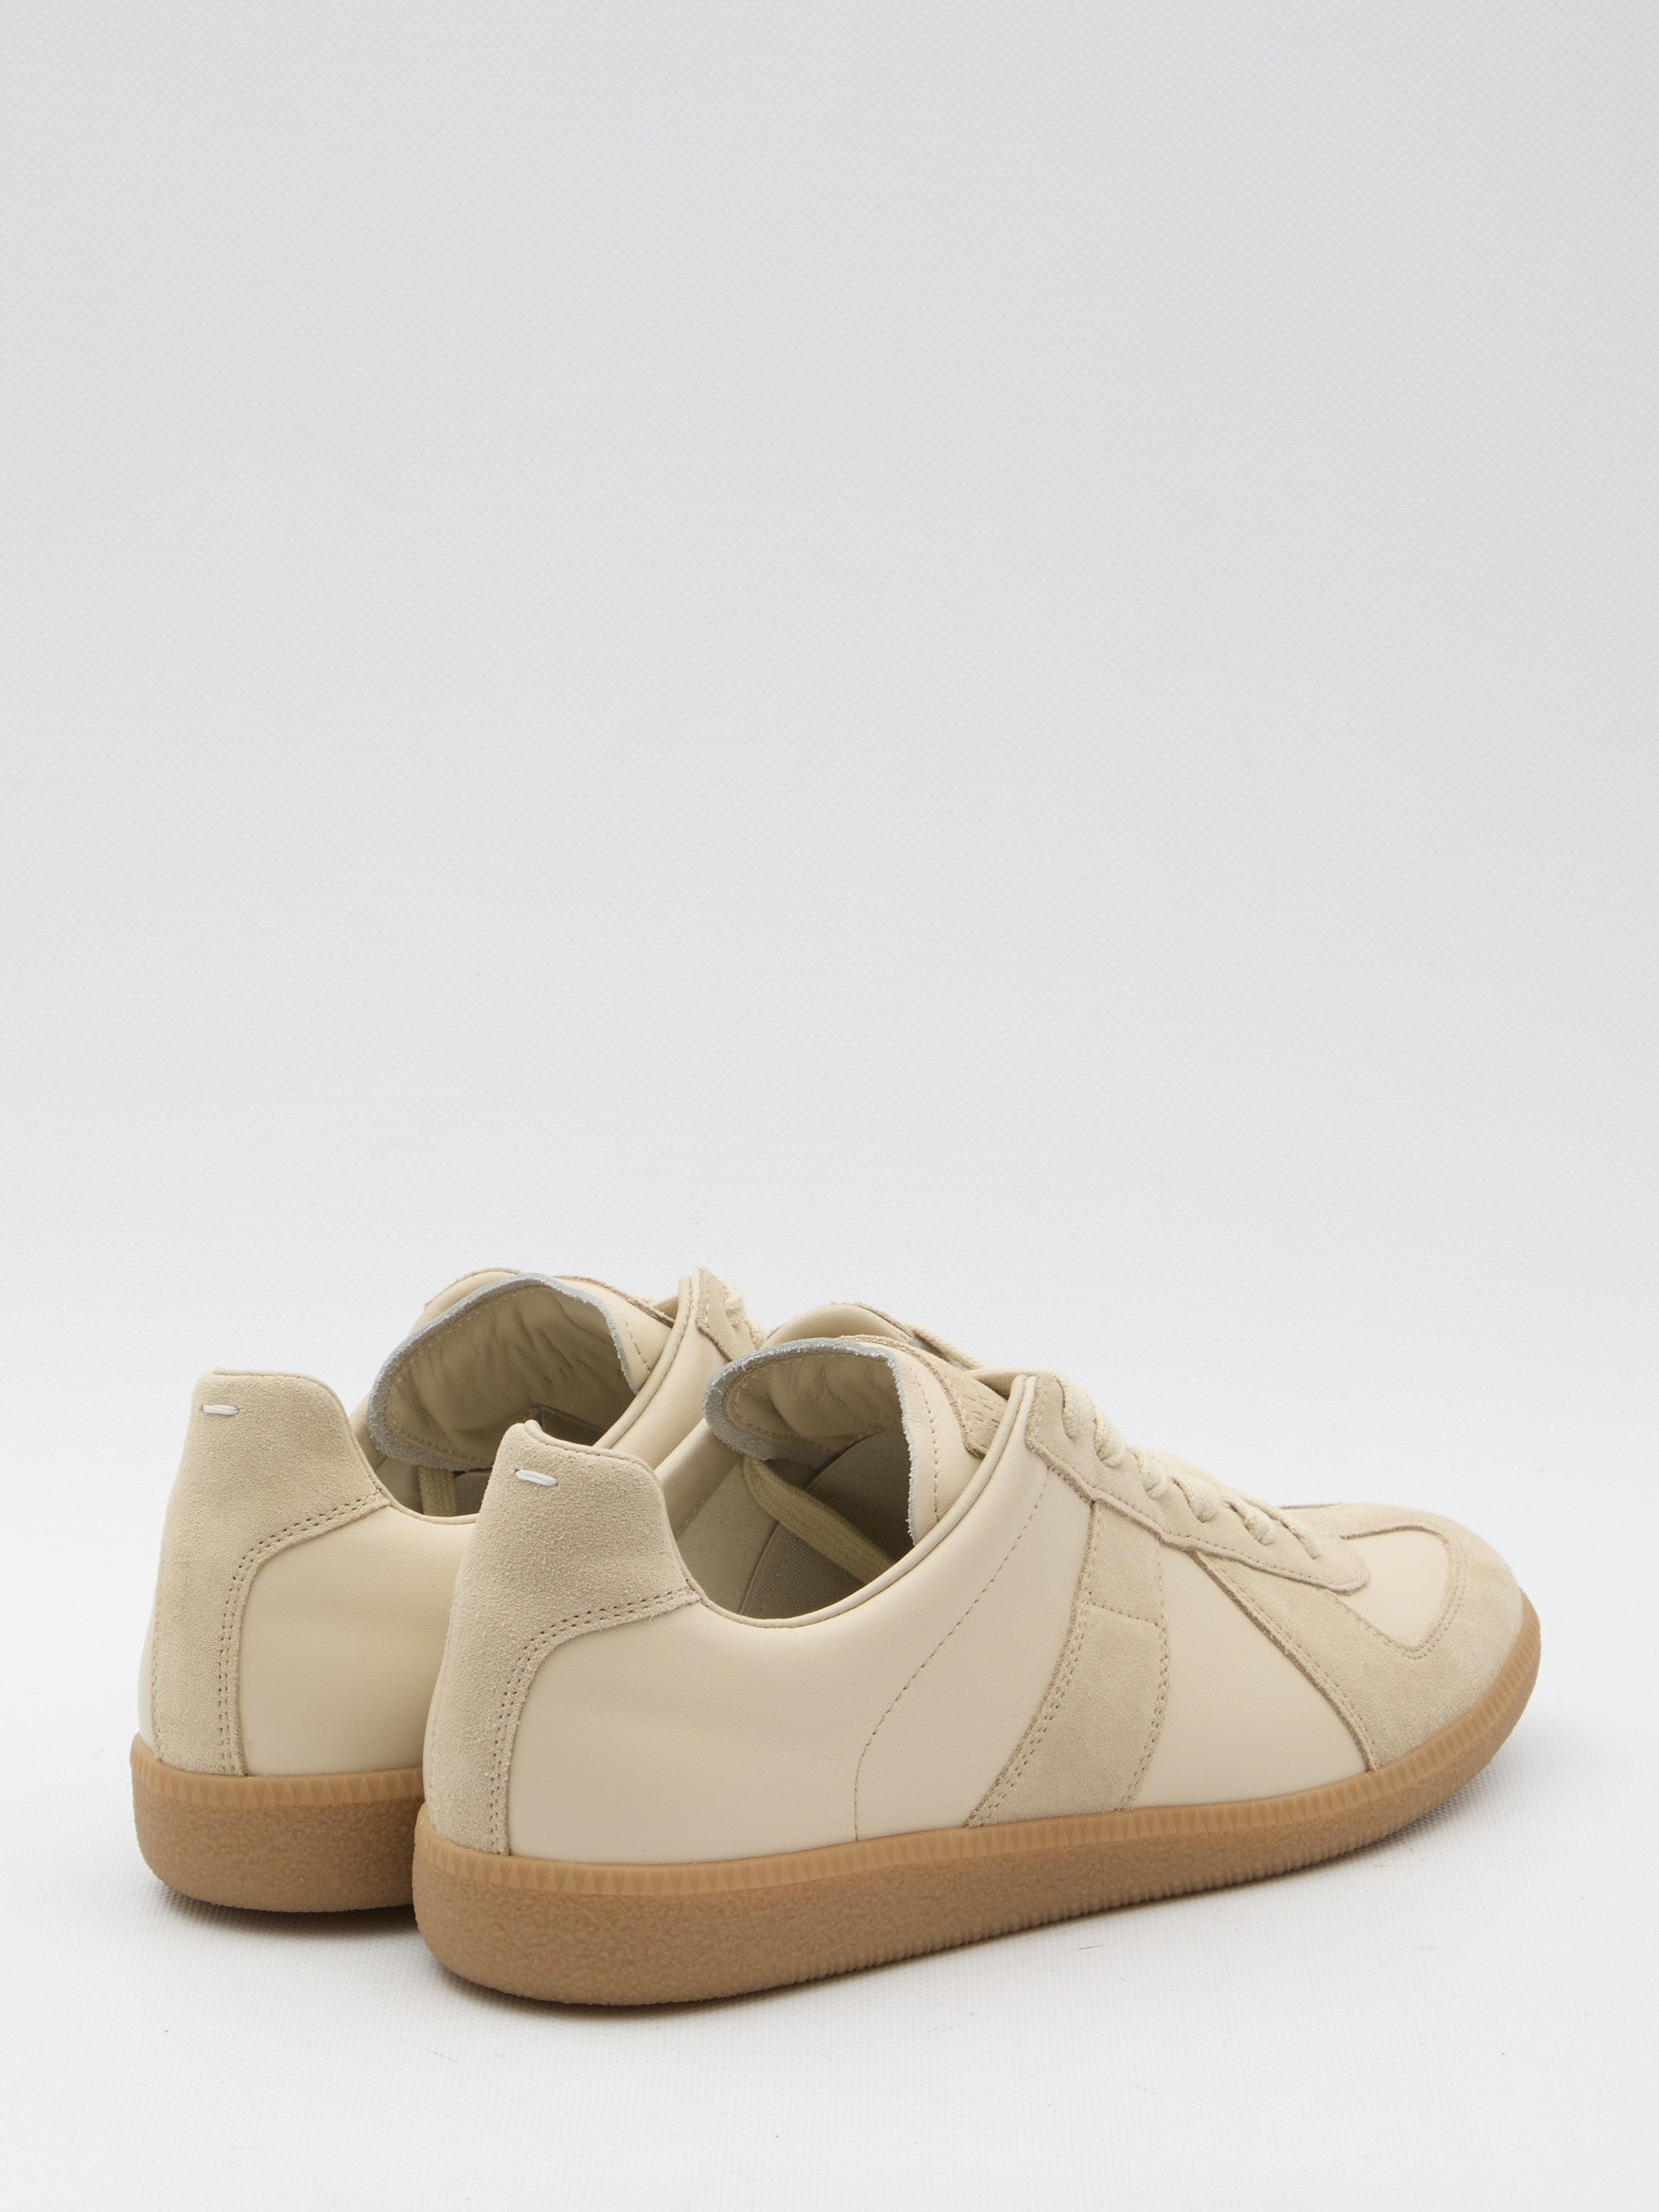 MAISON-MARGIELA-OUTLET-SALE-Replica-sneakers-Sneakers-ARCHIVE-COLLECTION-3_ef35745a-ed86-47ce-bb05-4cf17e5c1576.jpg